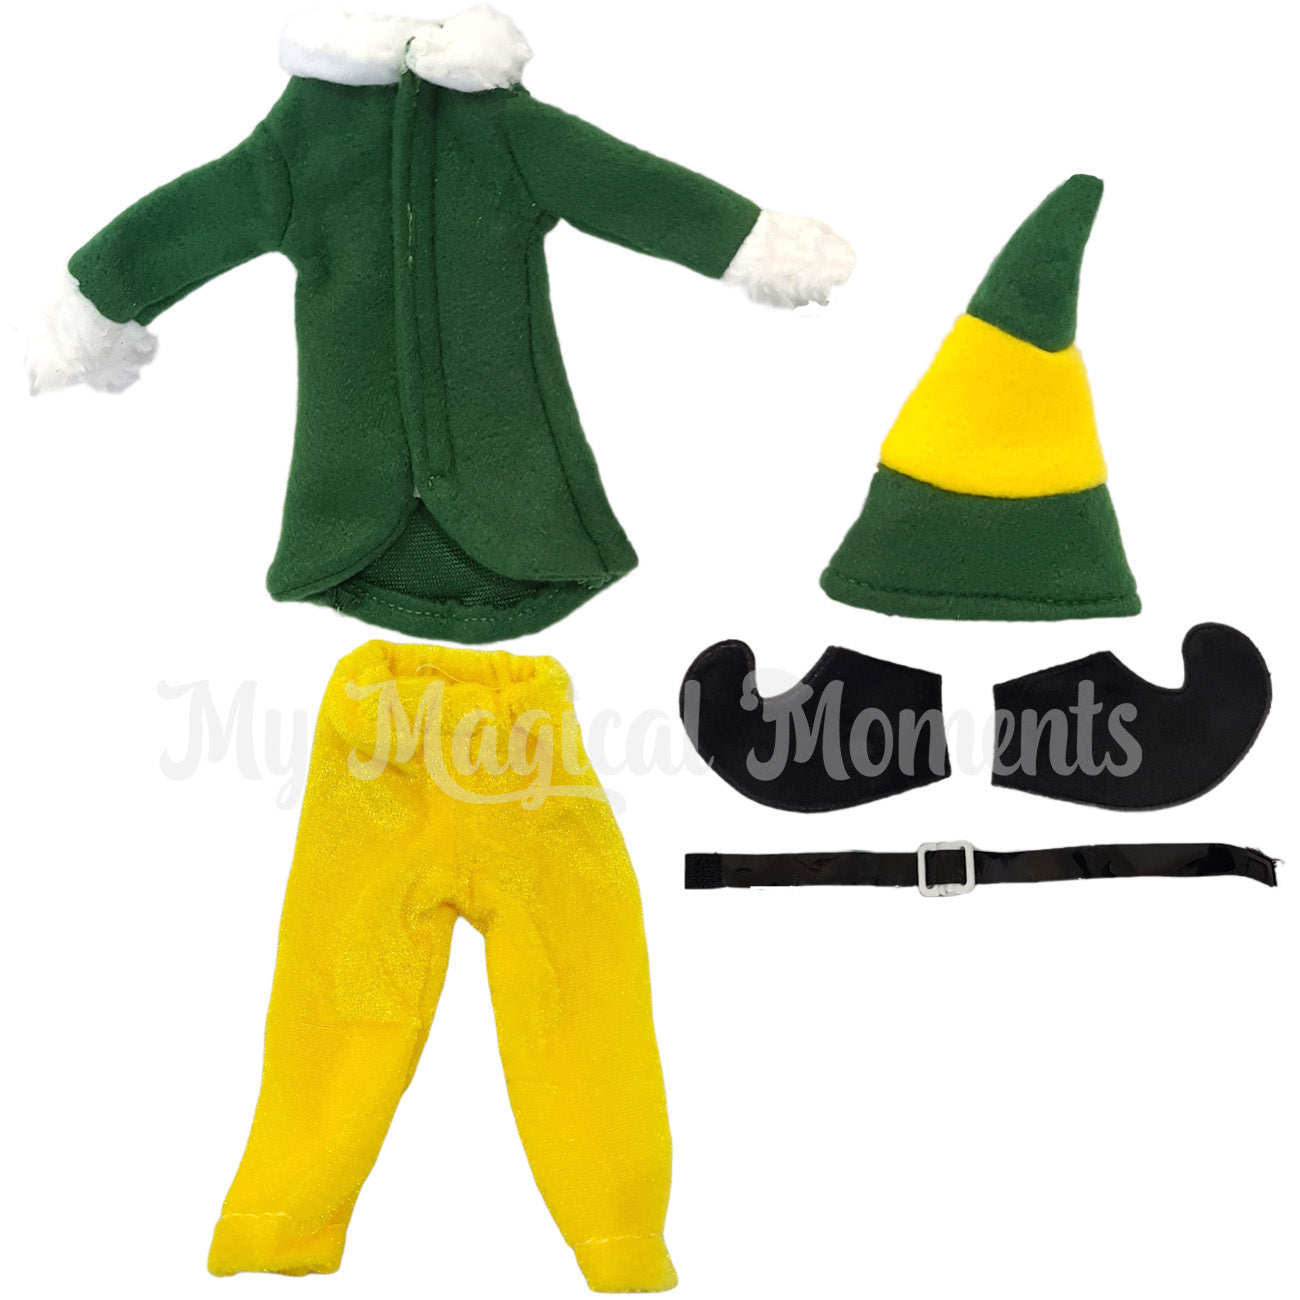 Buddy elf costume with green coat, black shoes, yellow pants, elf hat and belt